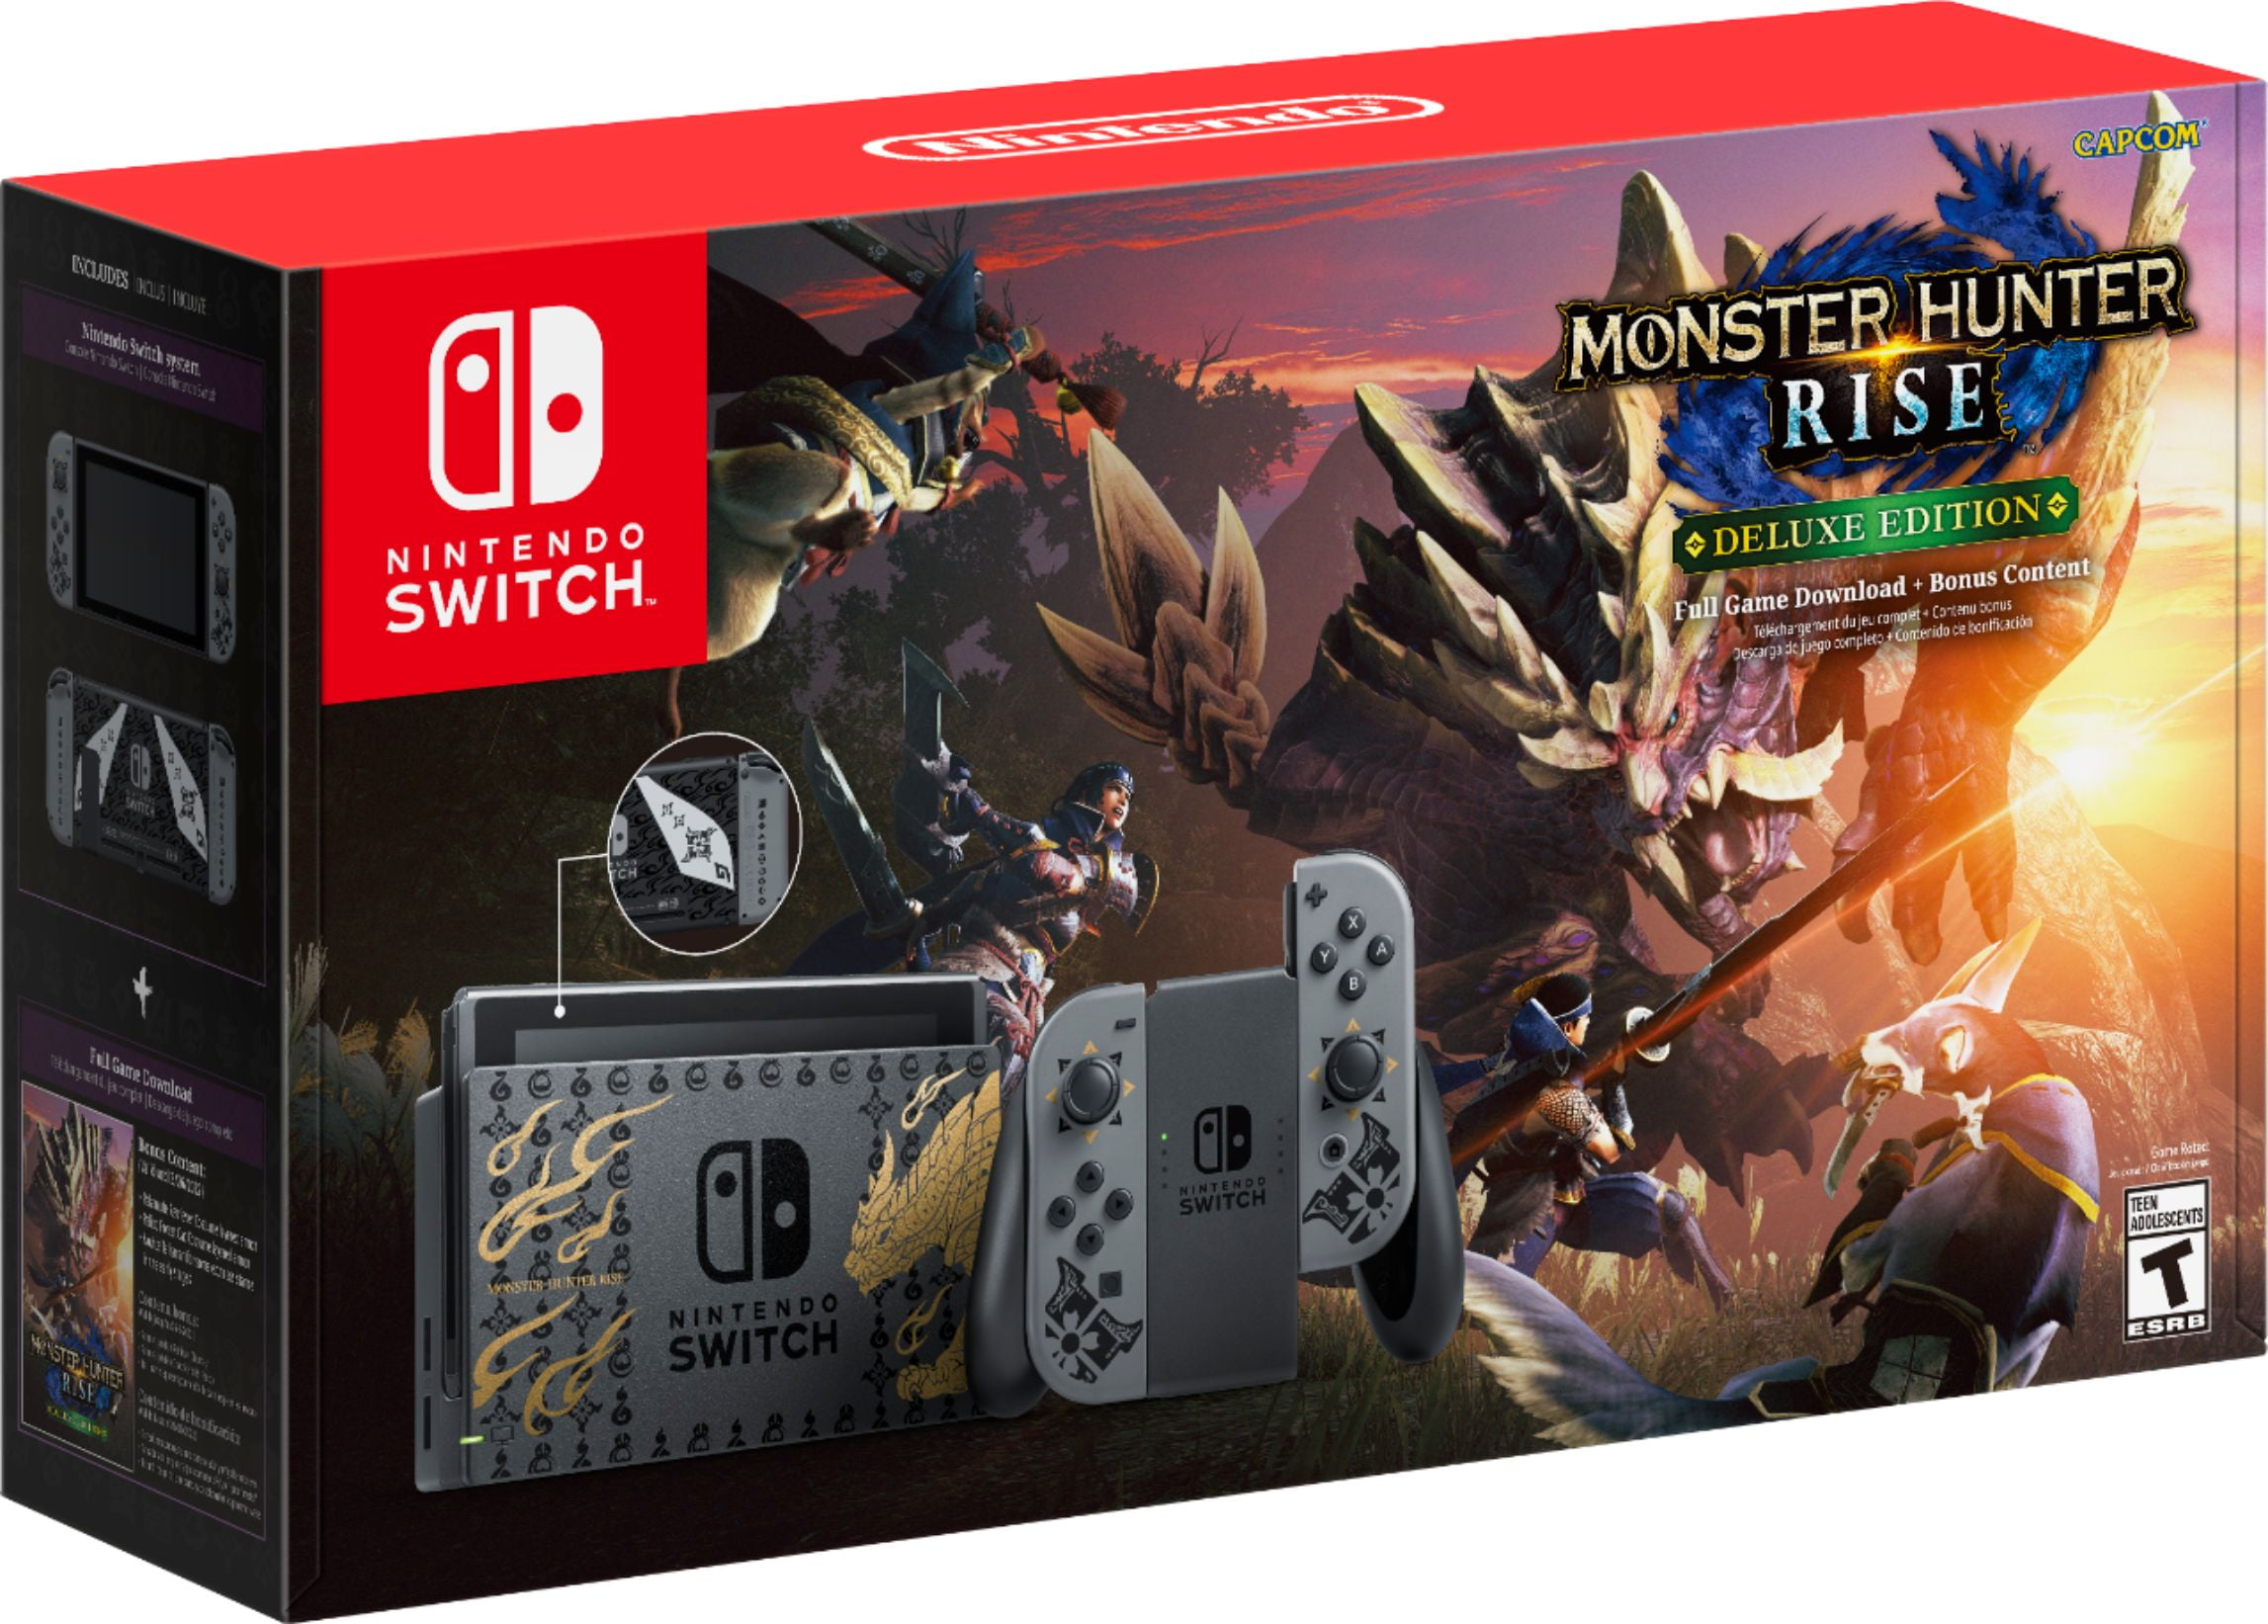 nintendo-switch-monster-hunter-rise-deluxe-edition-system-limited-edition-walmart